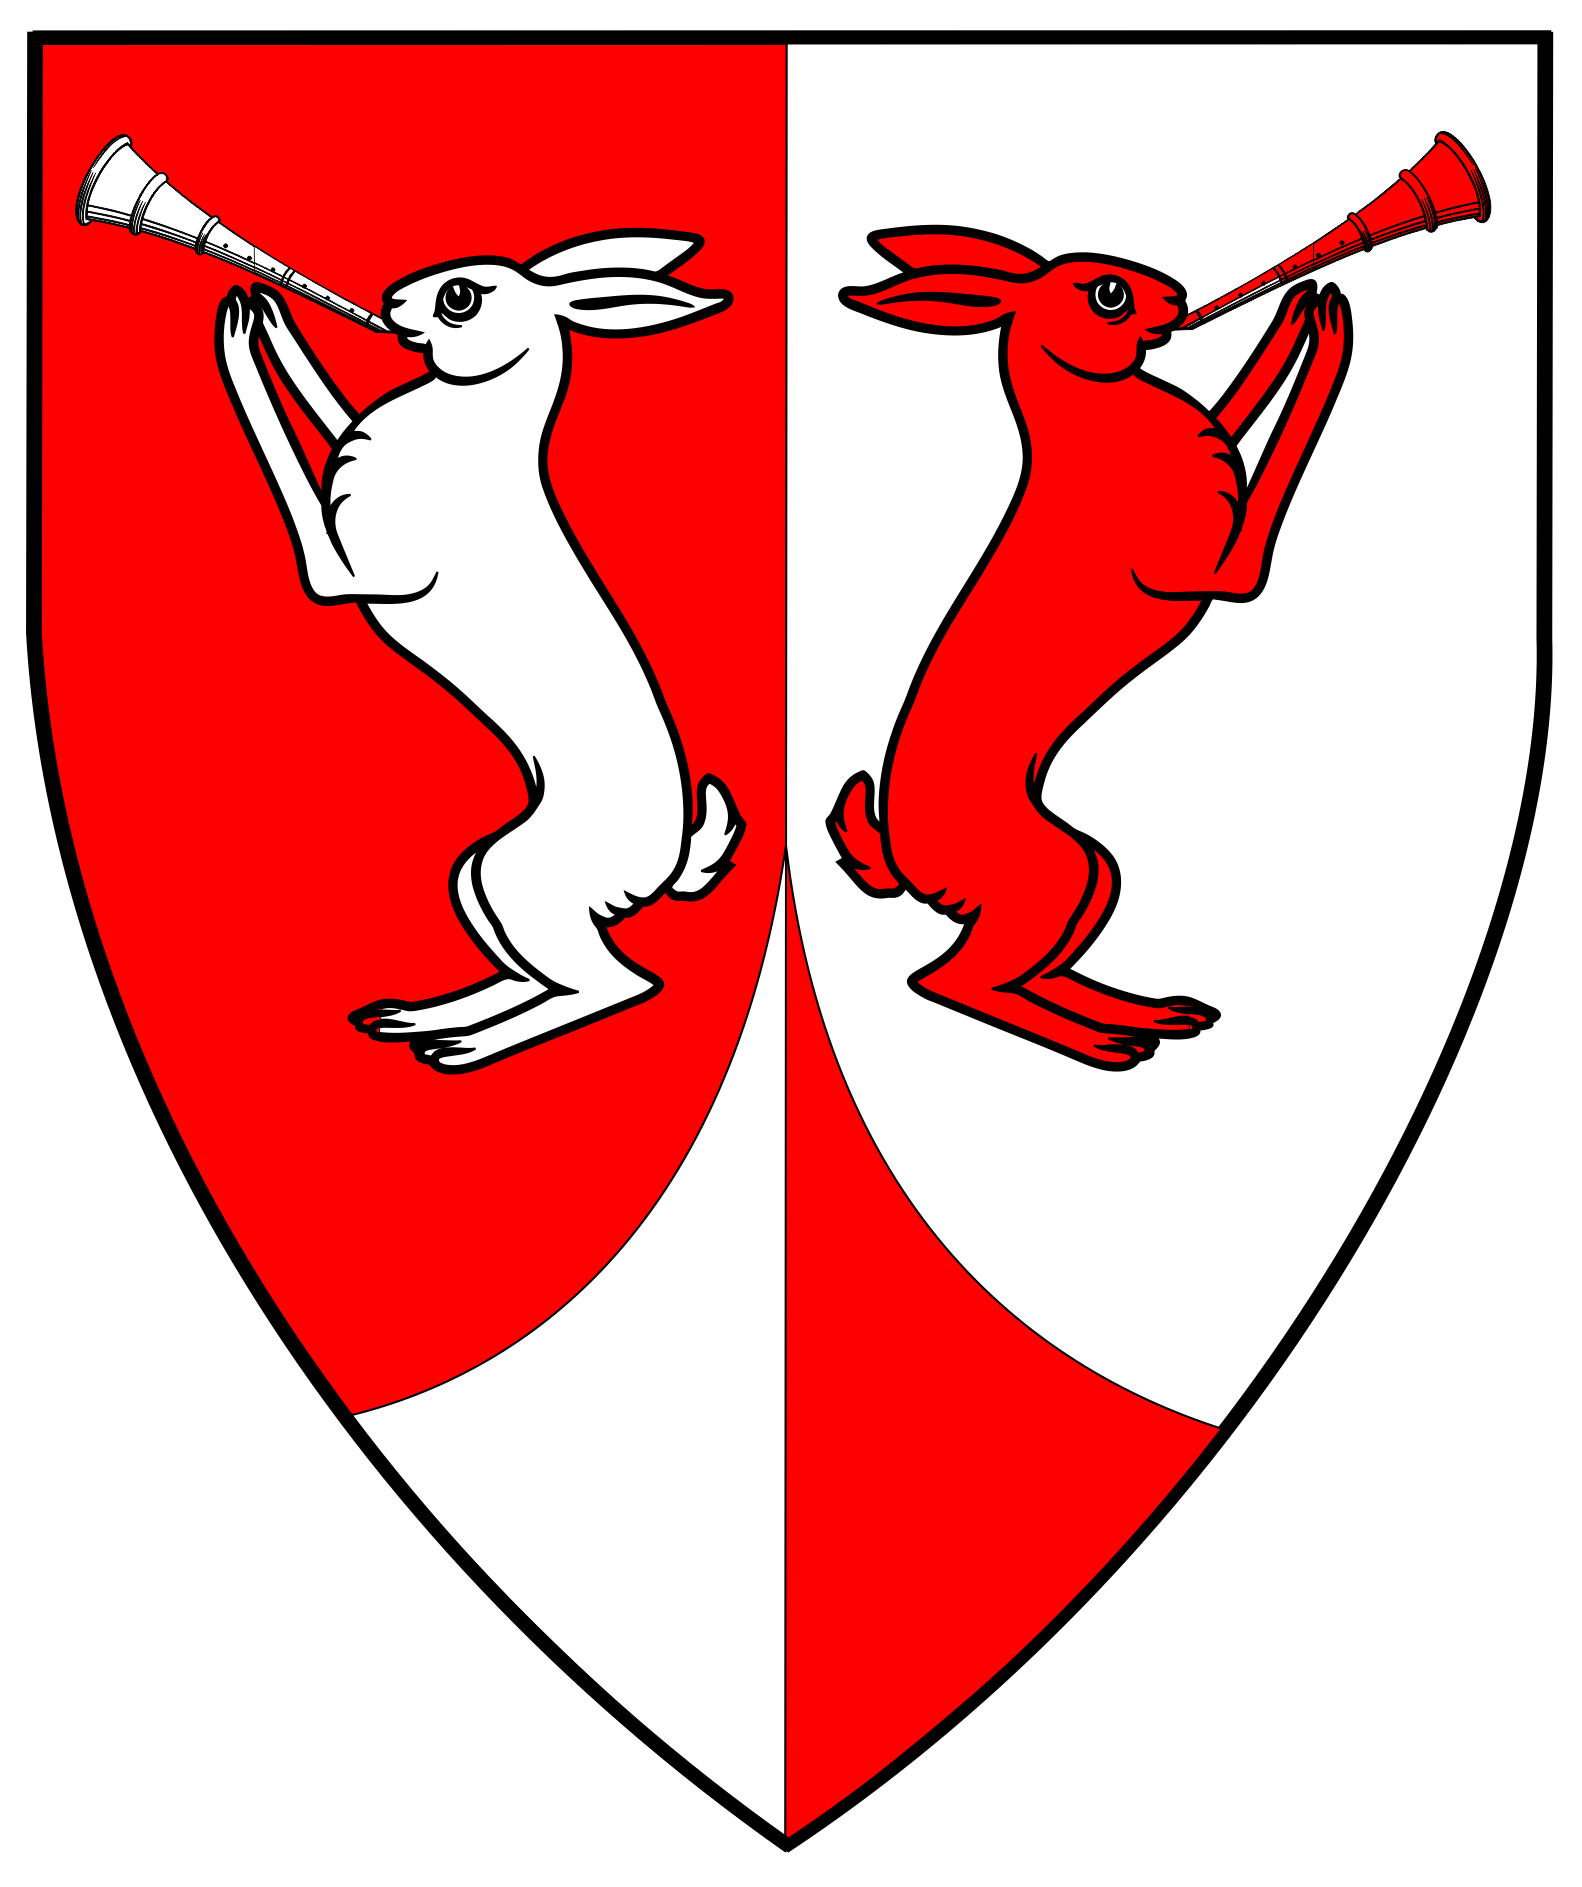 Per pale gules and argent, two rabbits salient addorsed each playing a hautboy, a point pointed counterchanged.